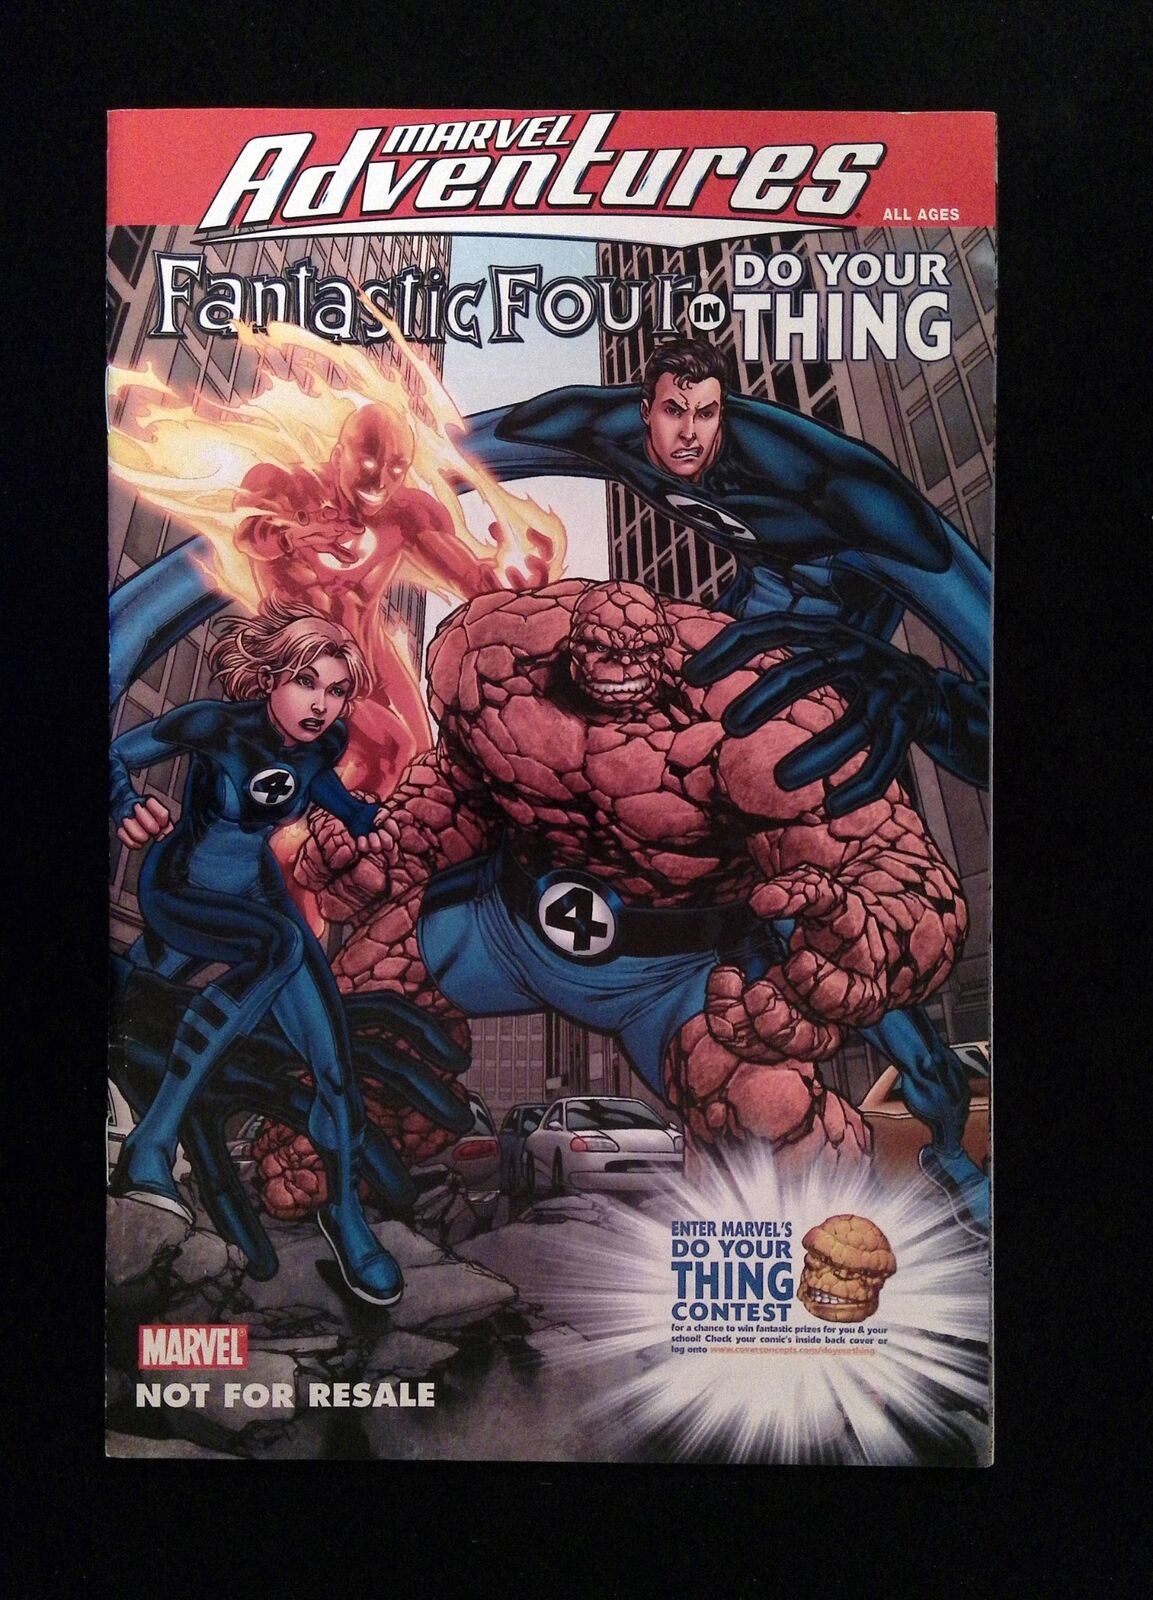 Marvel Adventures Fantastic Four Do Your Thing  #0  Marvel Comics 2005 VF+